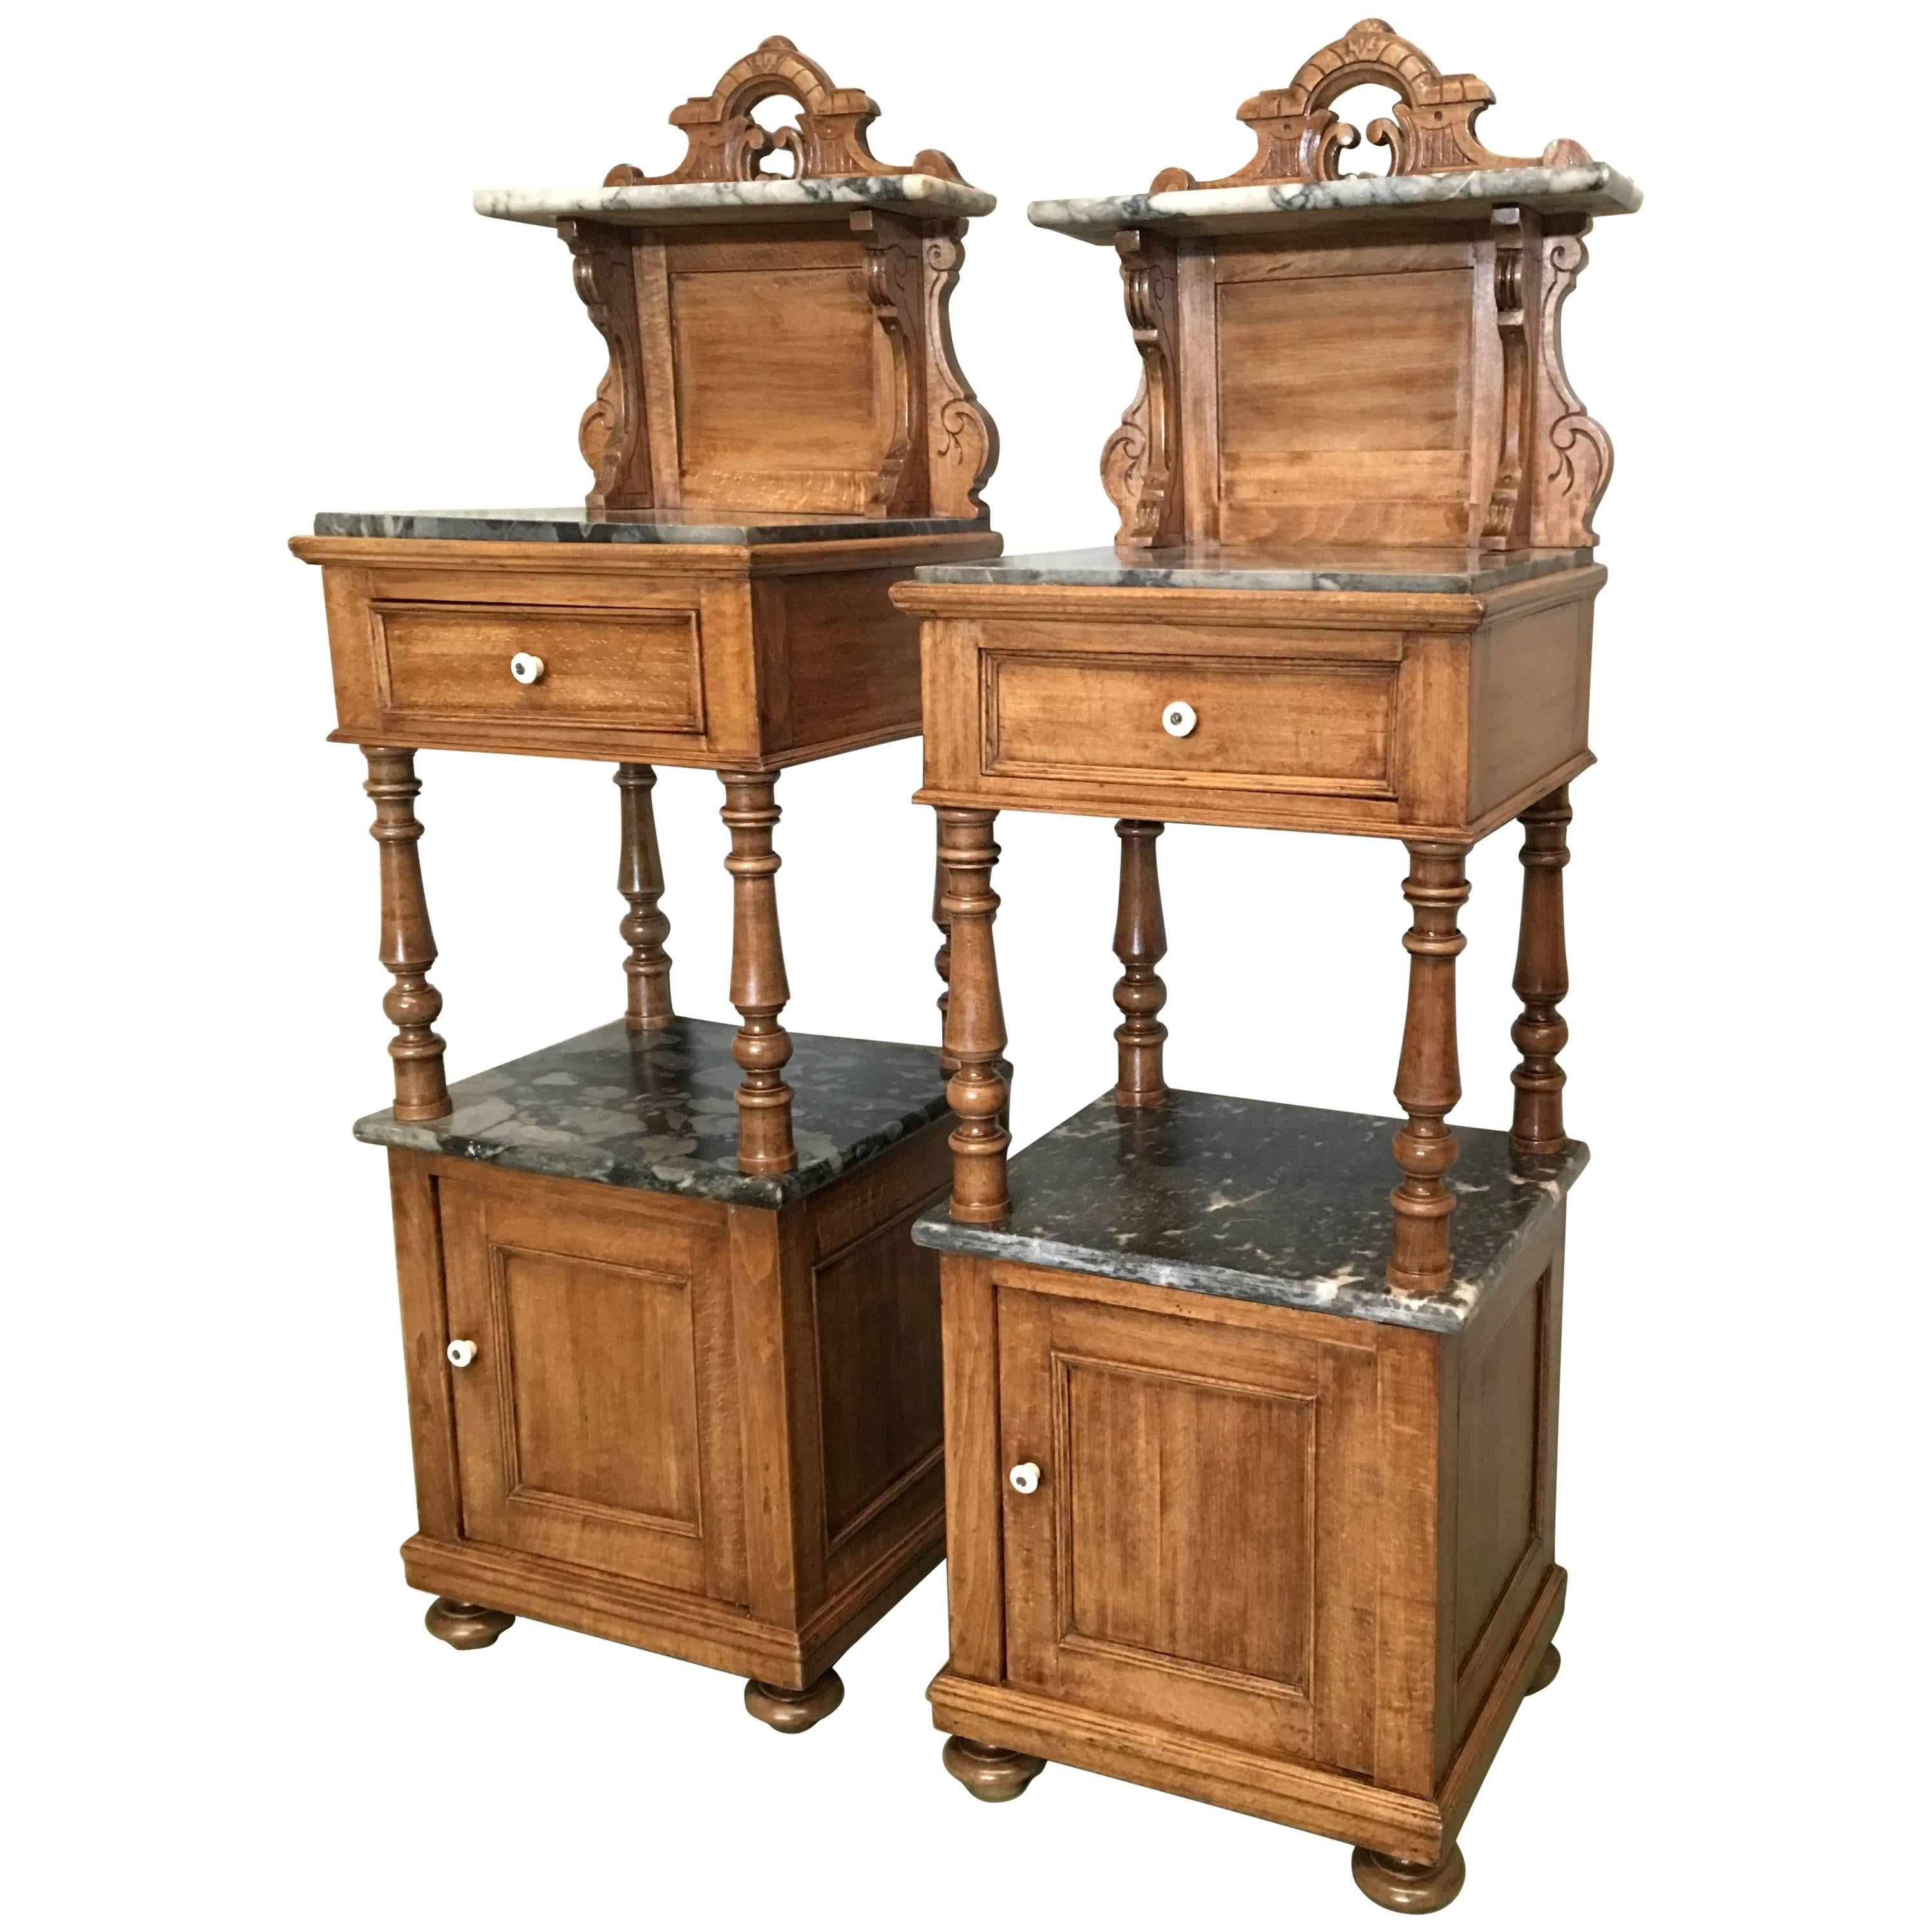 Antique, Tall and High Top Solid Oak Bedside Cabinets with Marble Top and Drawer